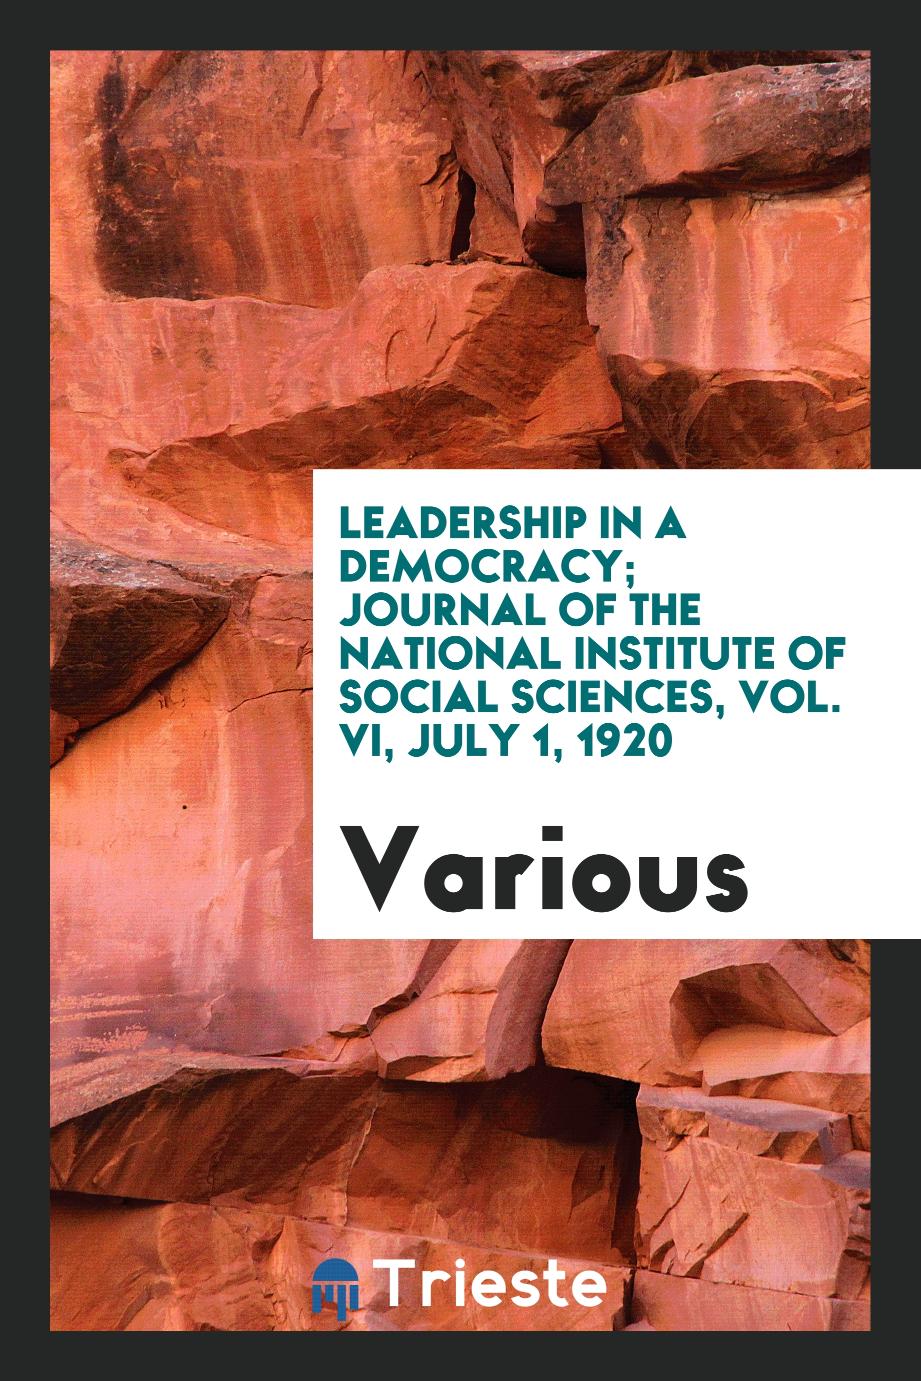 Leadership in a democracy; Journal of the National Institute of Social Sciences, Vol. VI, July 1, 1920